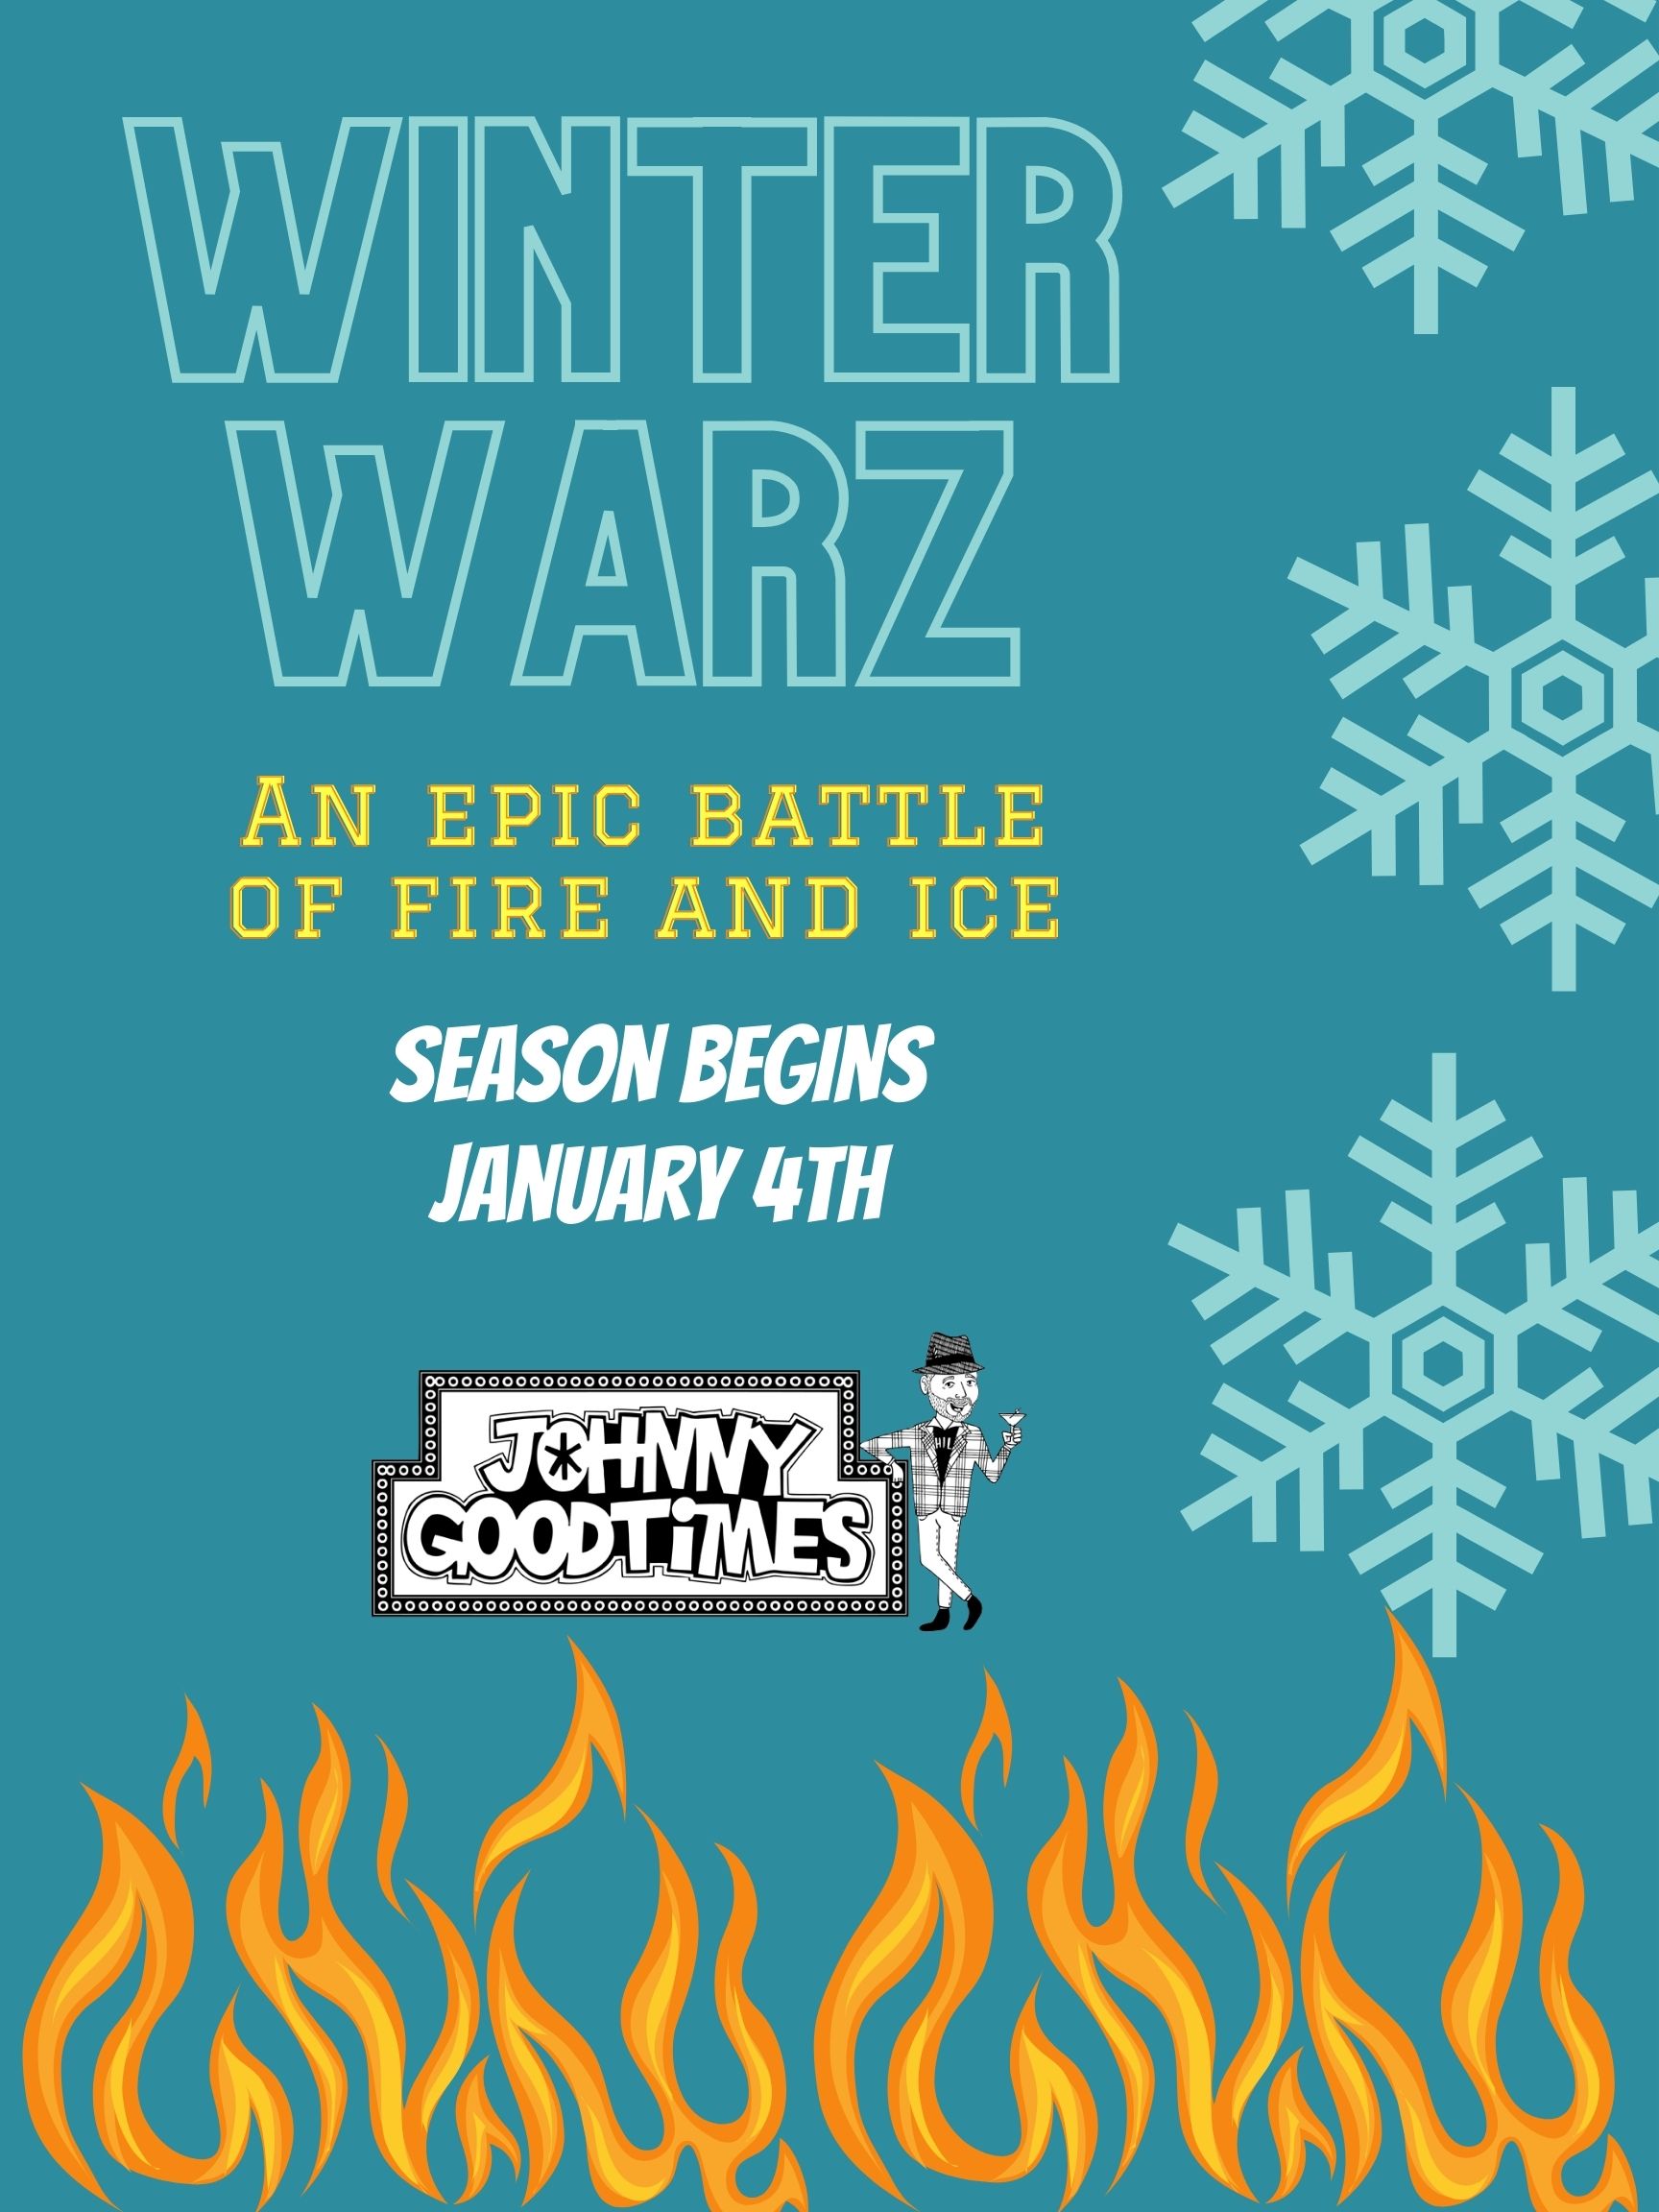 Everything You Need to Know About Winter Warz Johnny Goodtimes